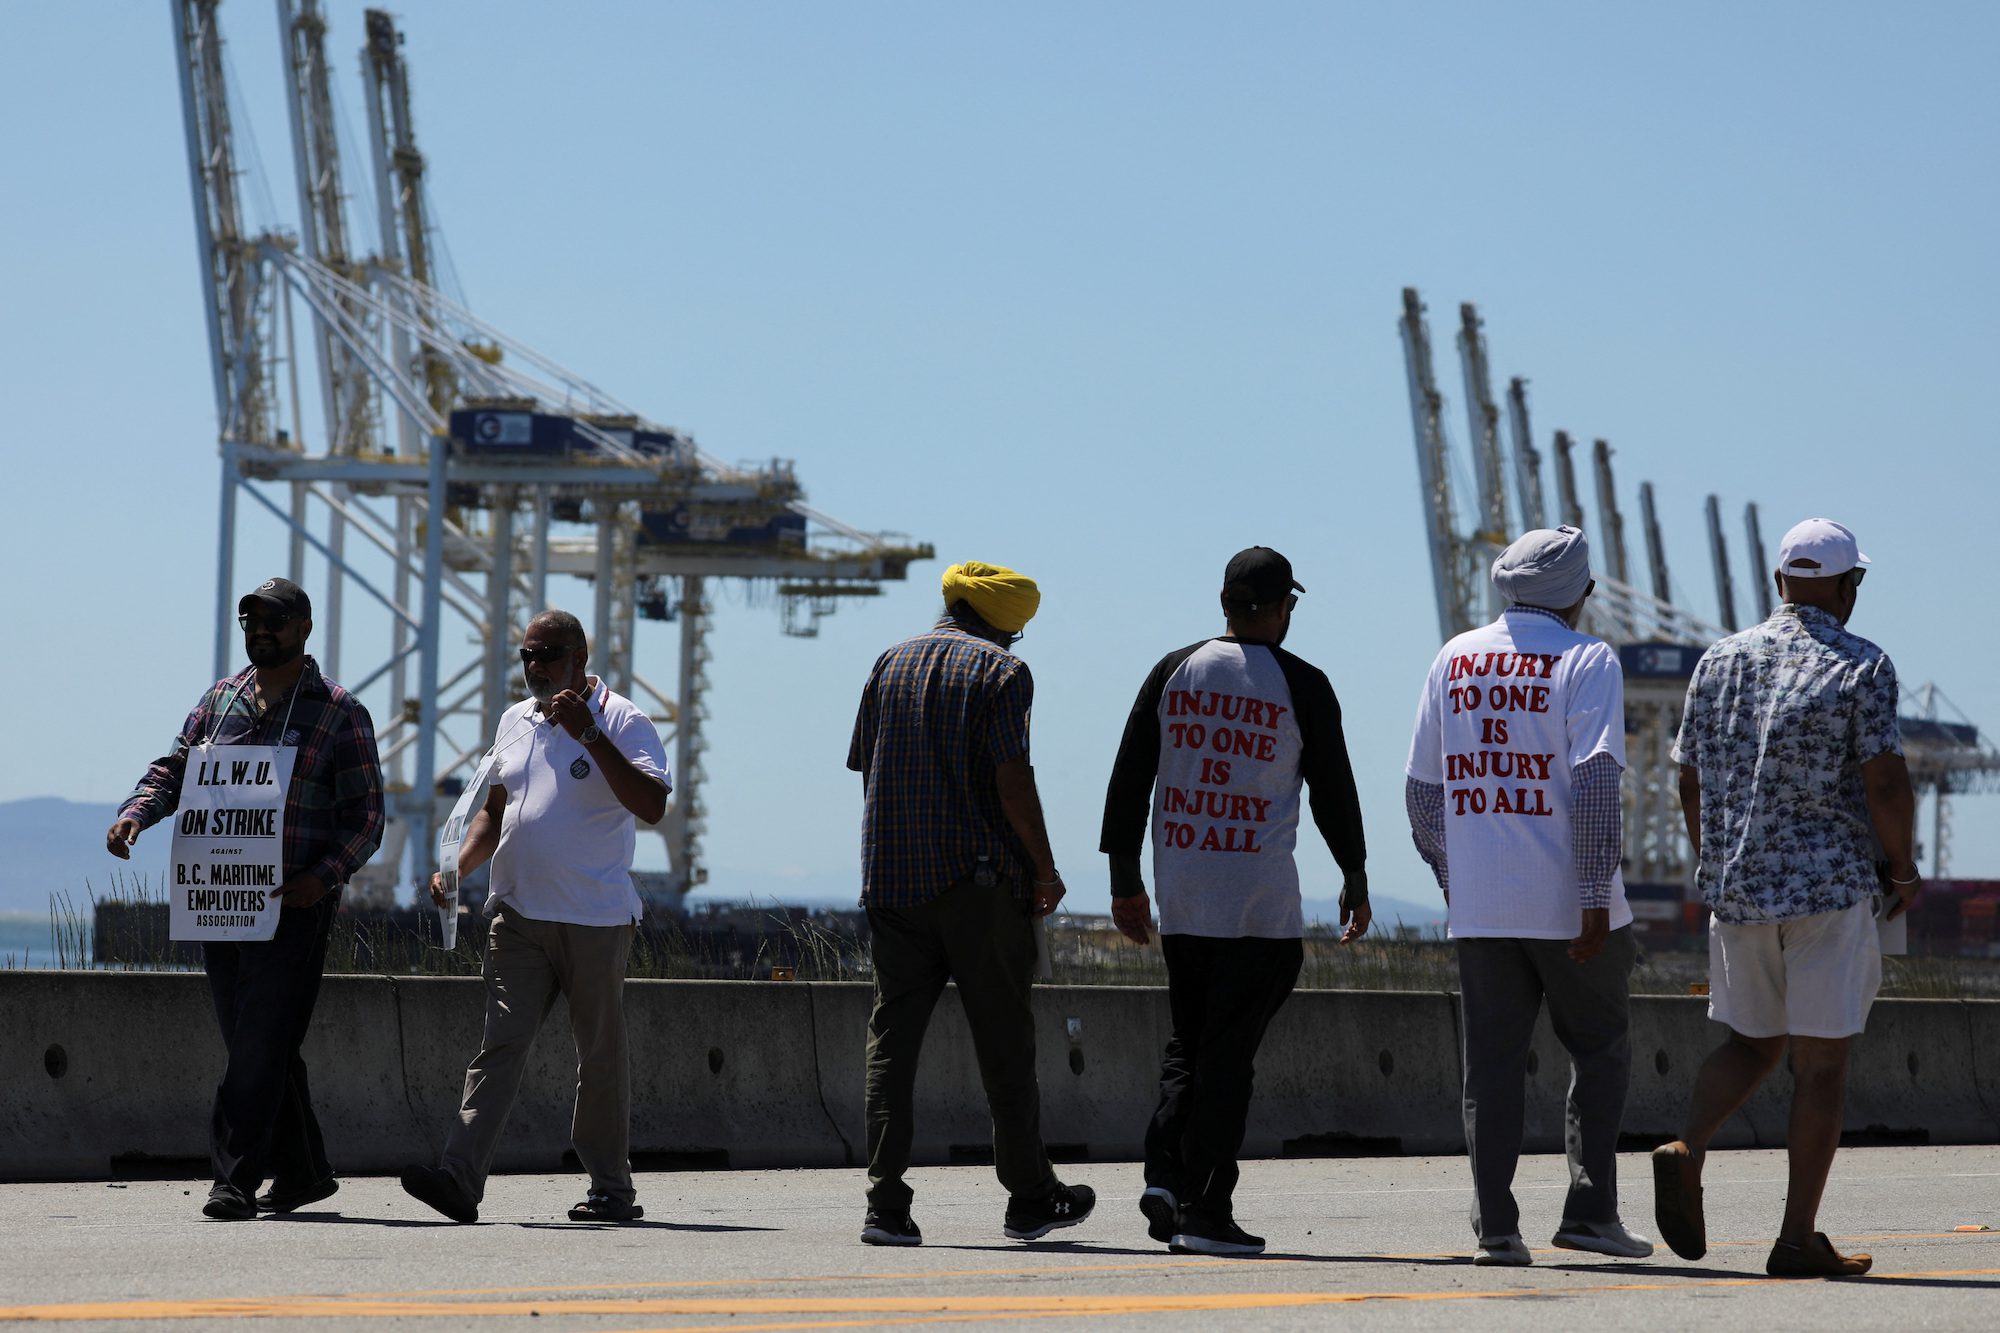 British Columbia Dockworkers Issue New 72-Hour Strike Notice After Order to Resume